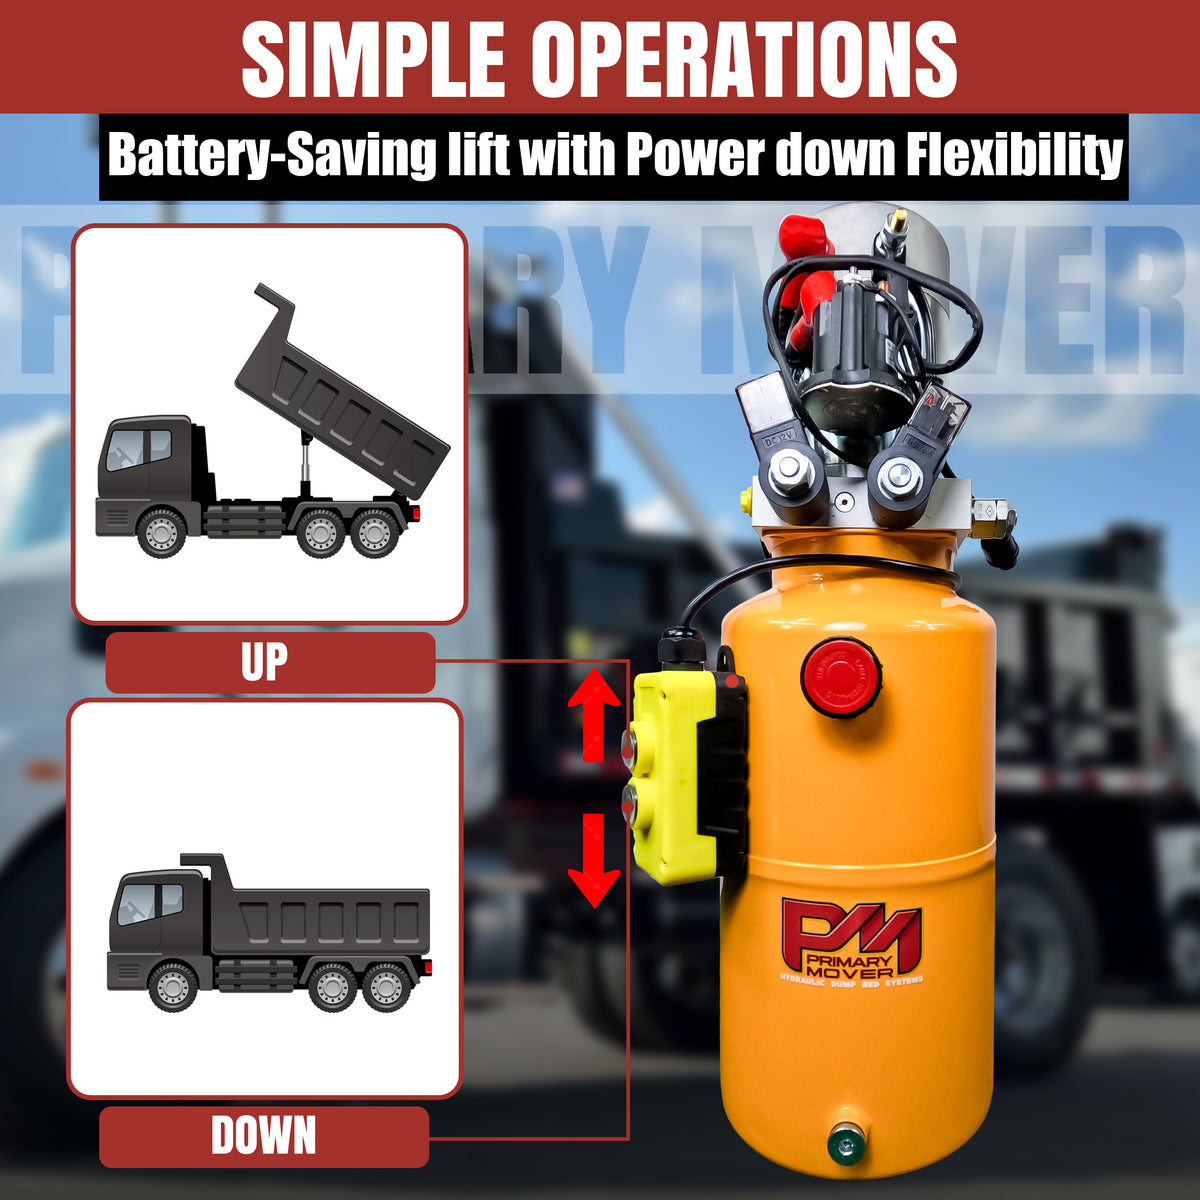 Primary Mover Double Acting 12VDC Hydraulic Power Unit with Steel Reservoirs: Dual-acting precision, tailored for dump bed systems, quality craftsmanship, and value-driven performance.